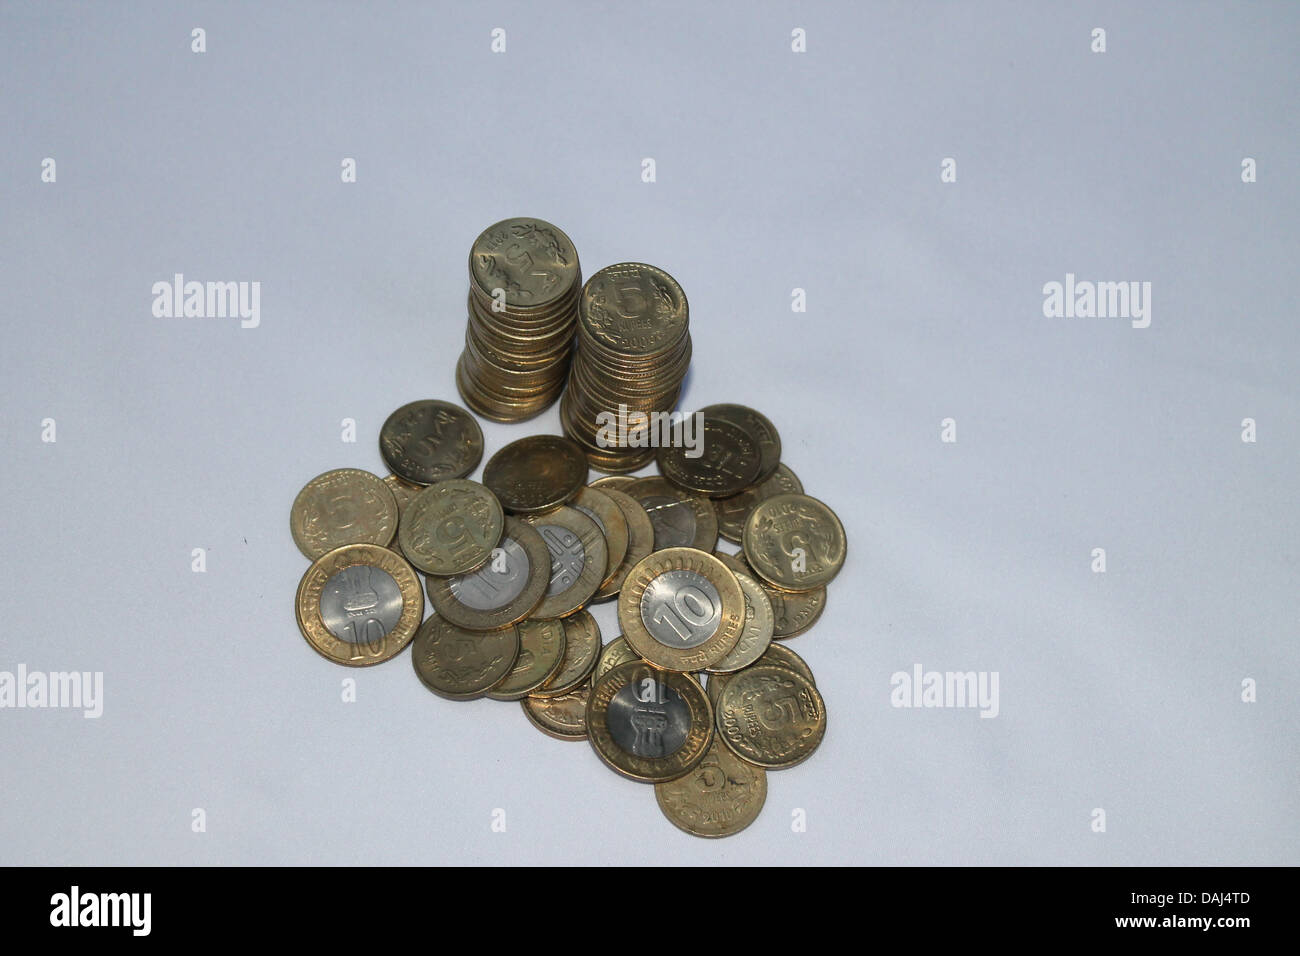 Indian currency coins of 5 rupees and 10 rupees Stock Photo